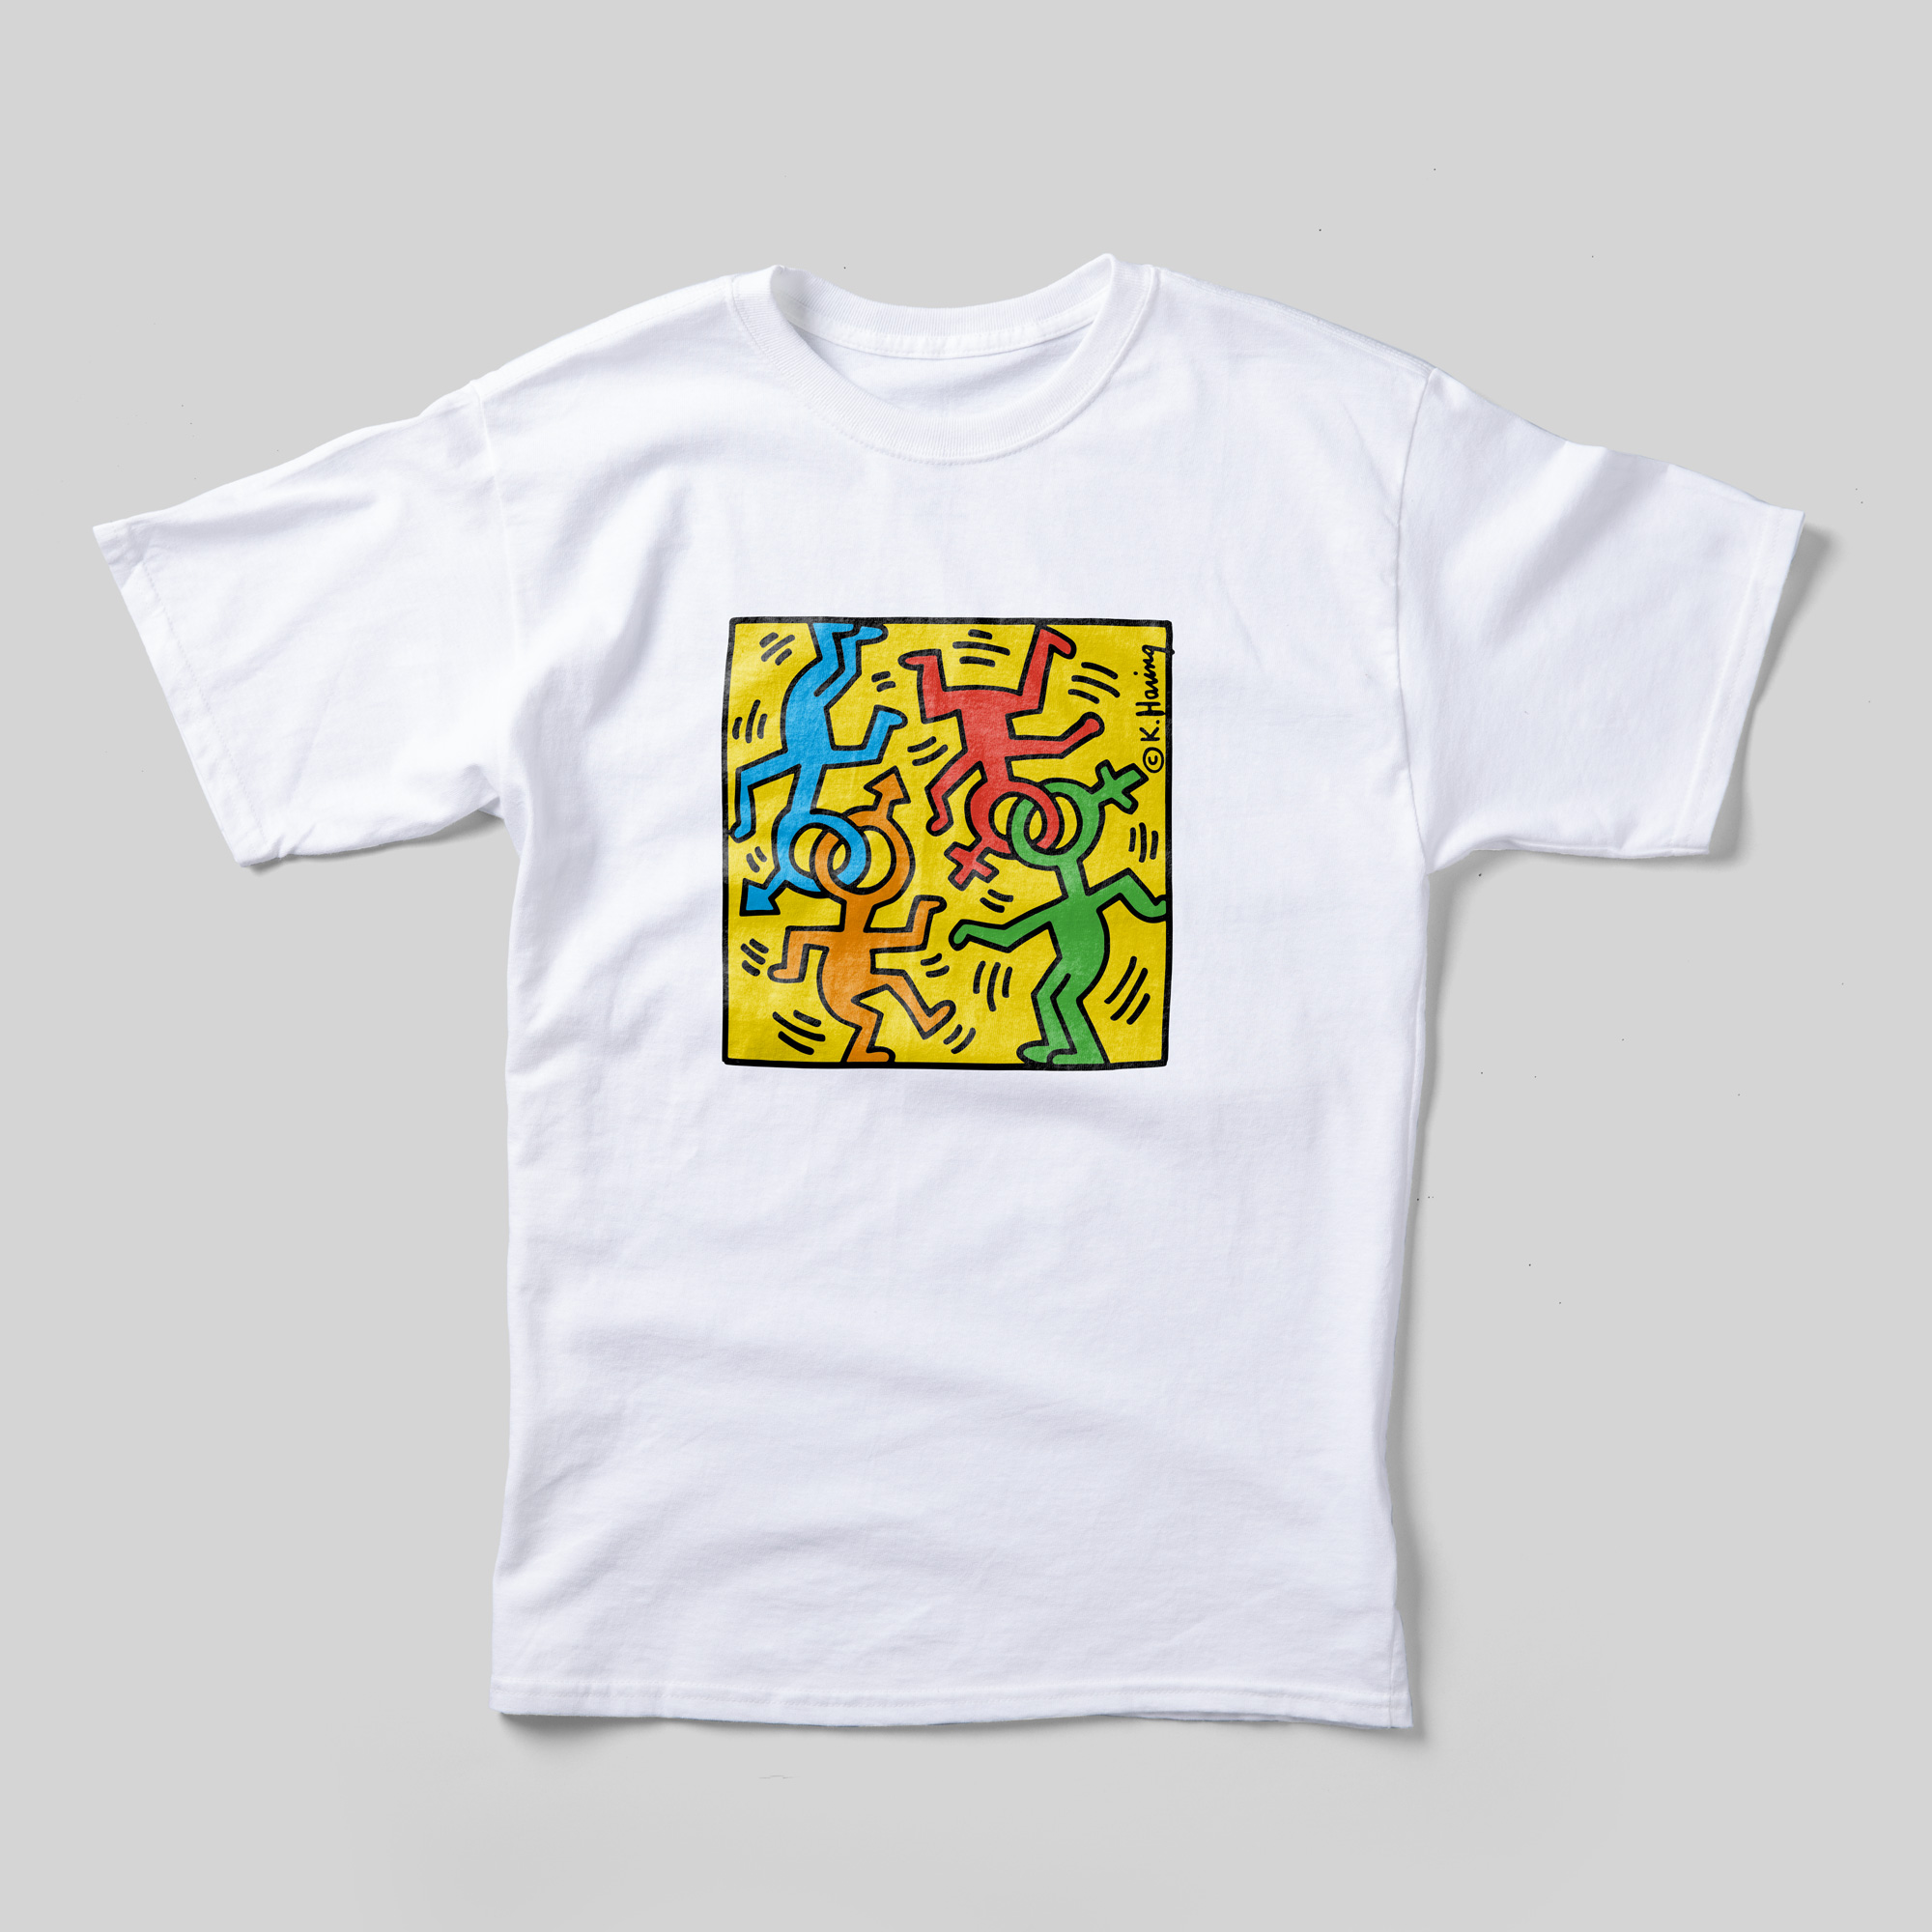 A white t-shirt with Keith Haring's Heritage of Pride artwork on the front.